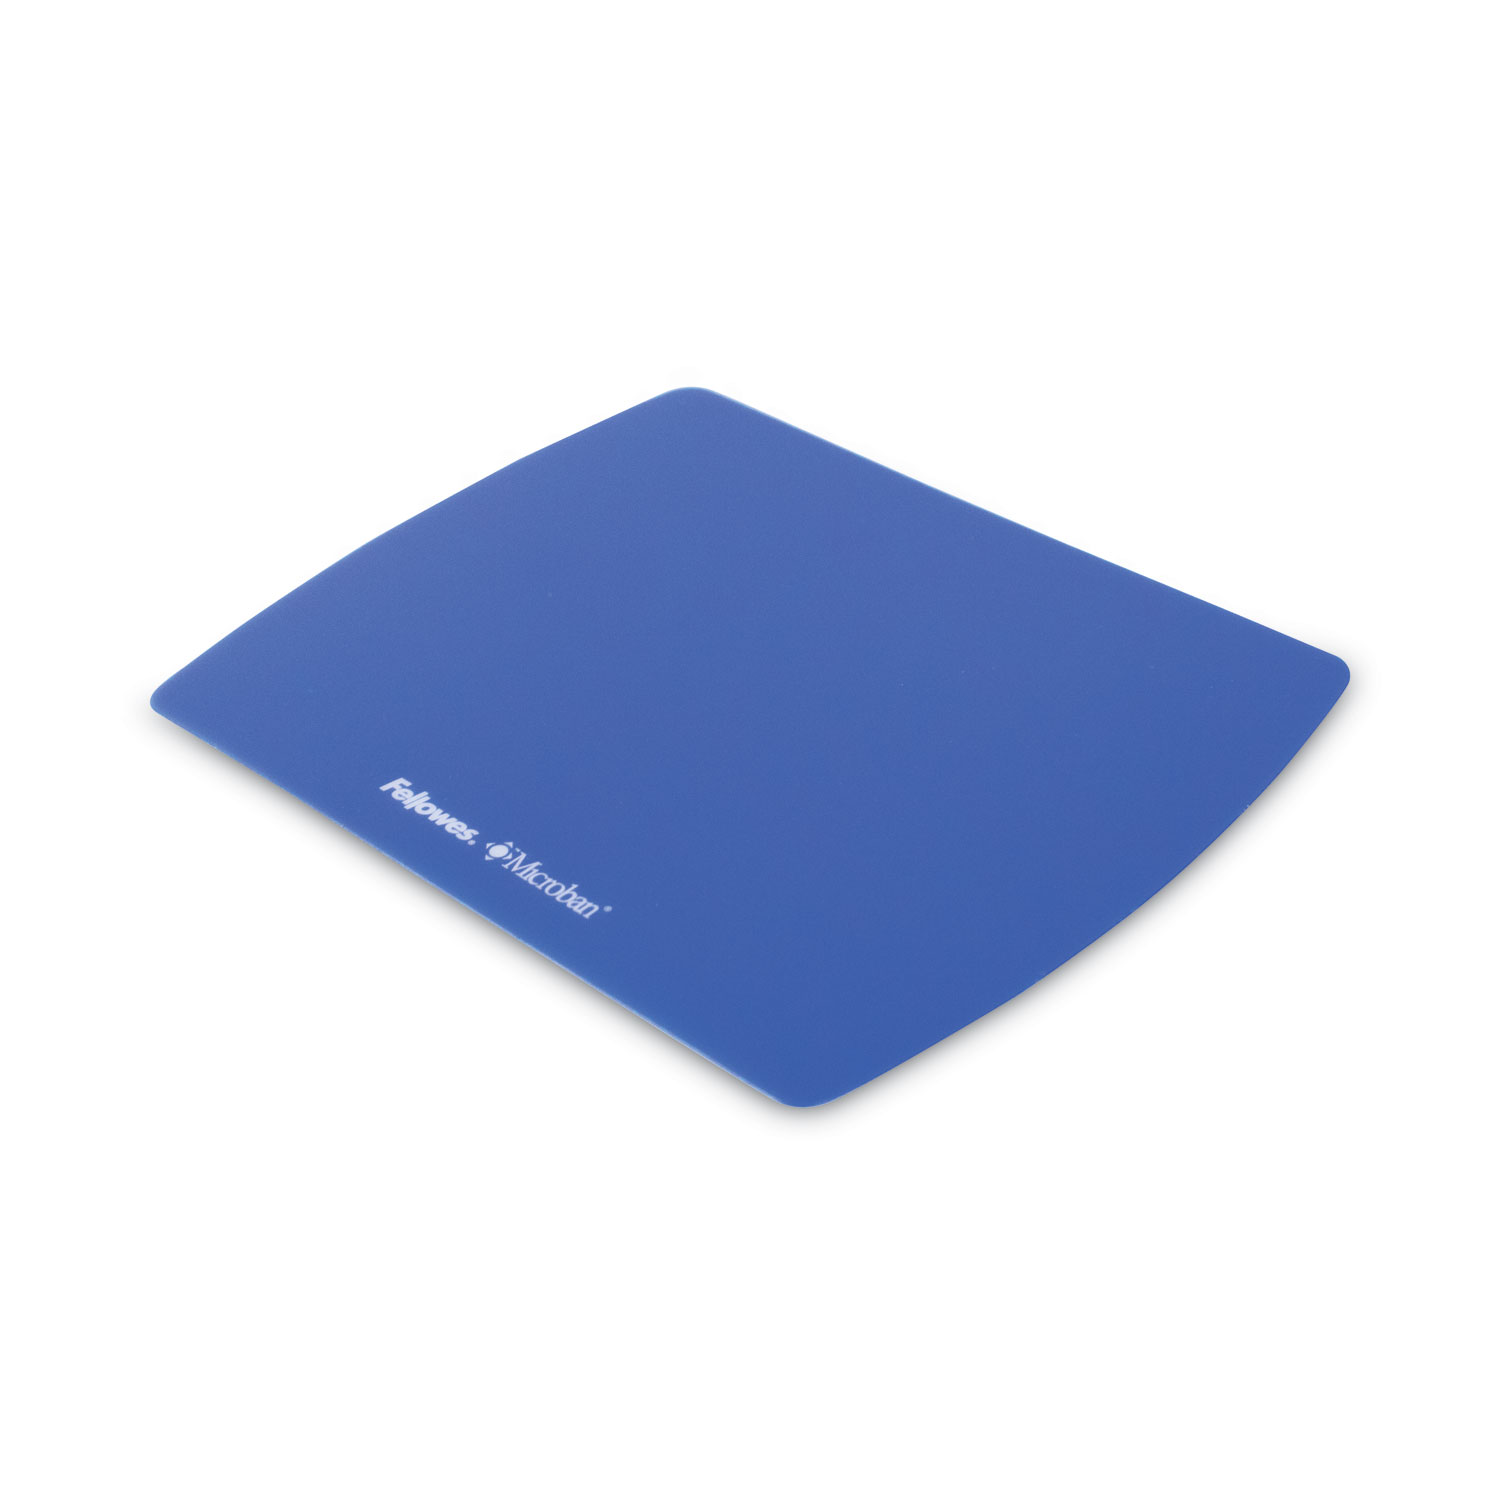 Ultra Thin Mouse Pad with Microban Protection, 9 x 7, Sapphire